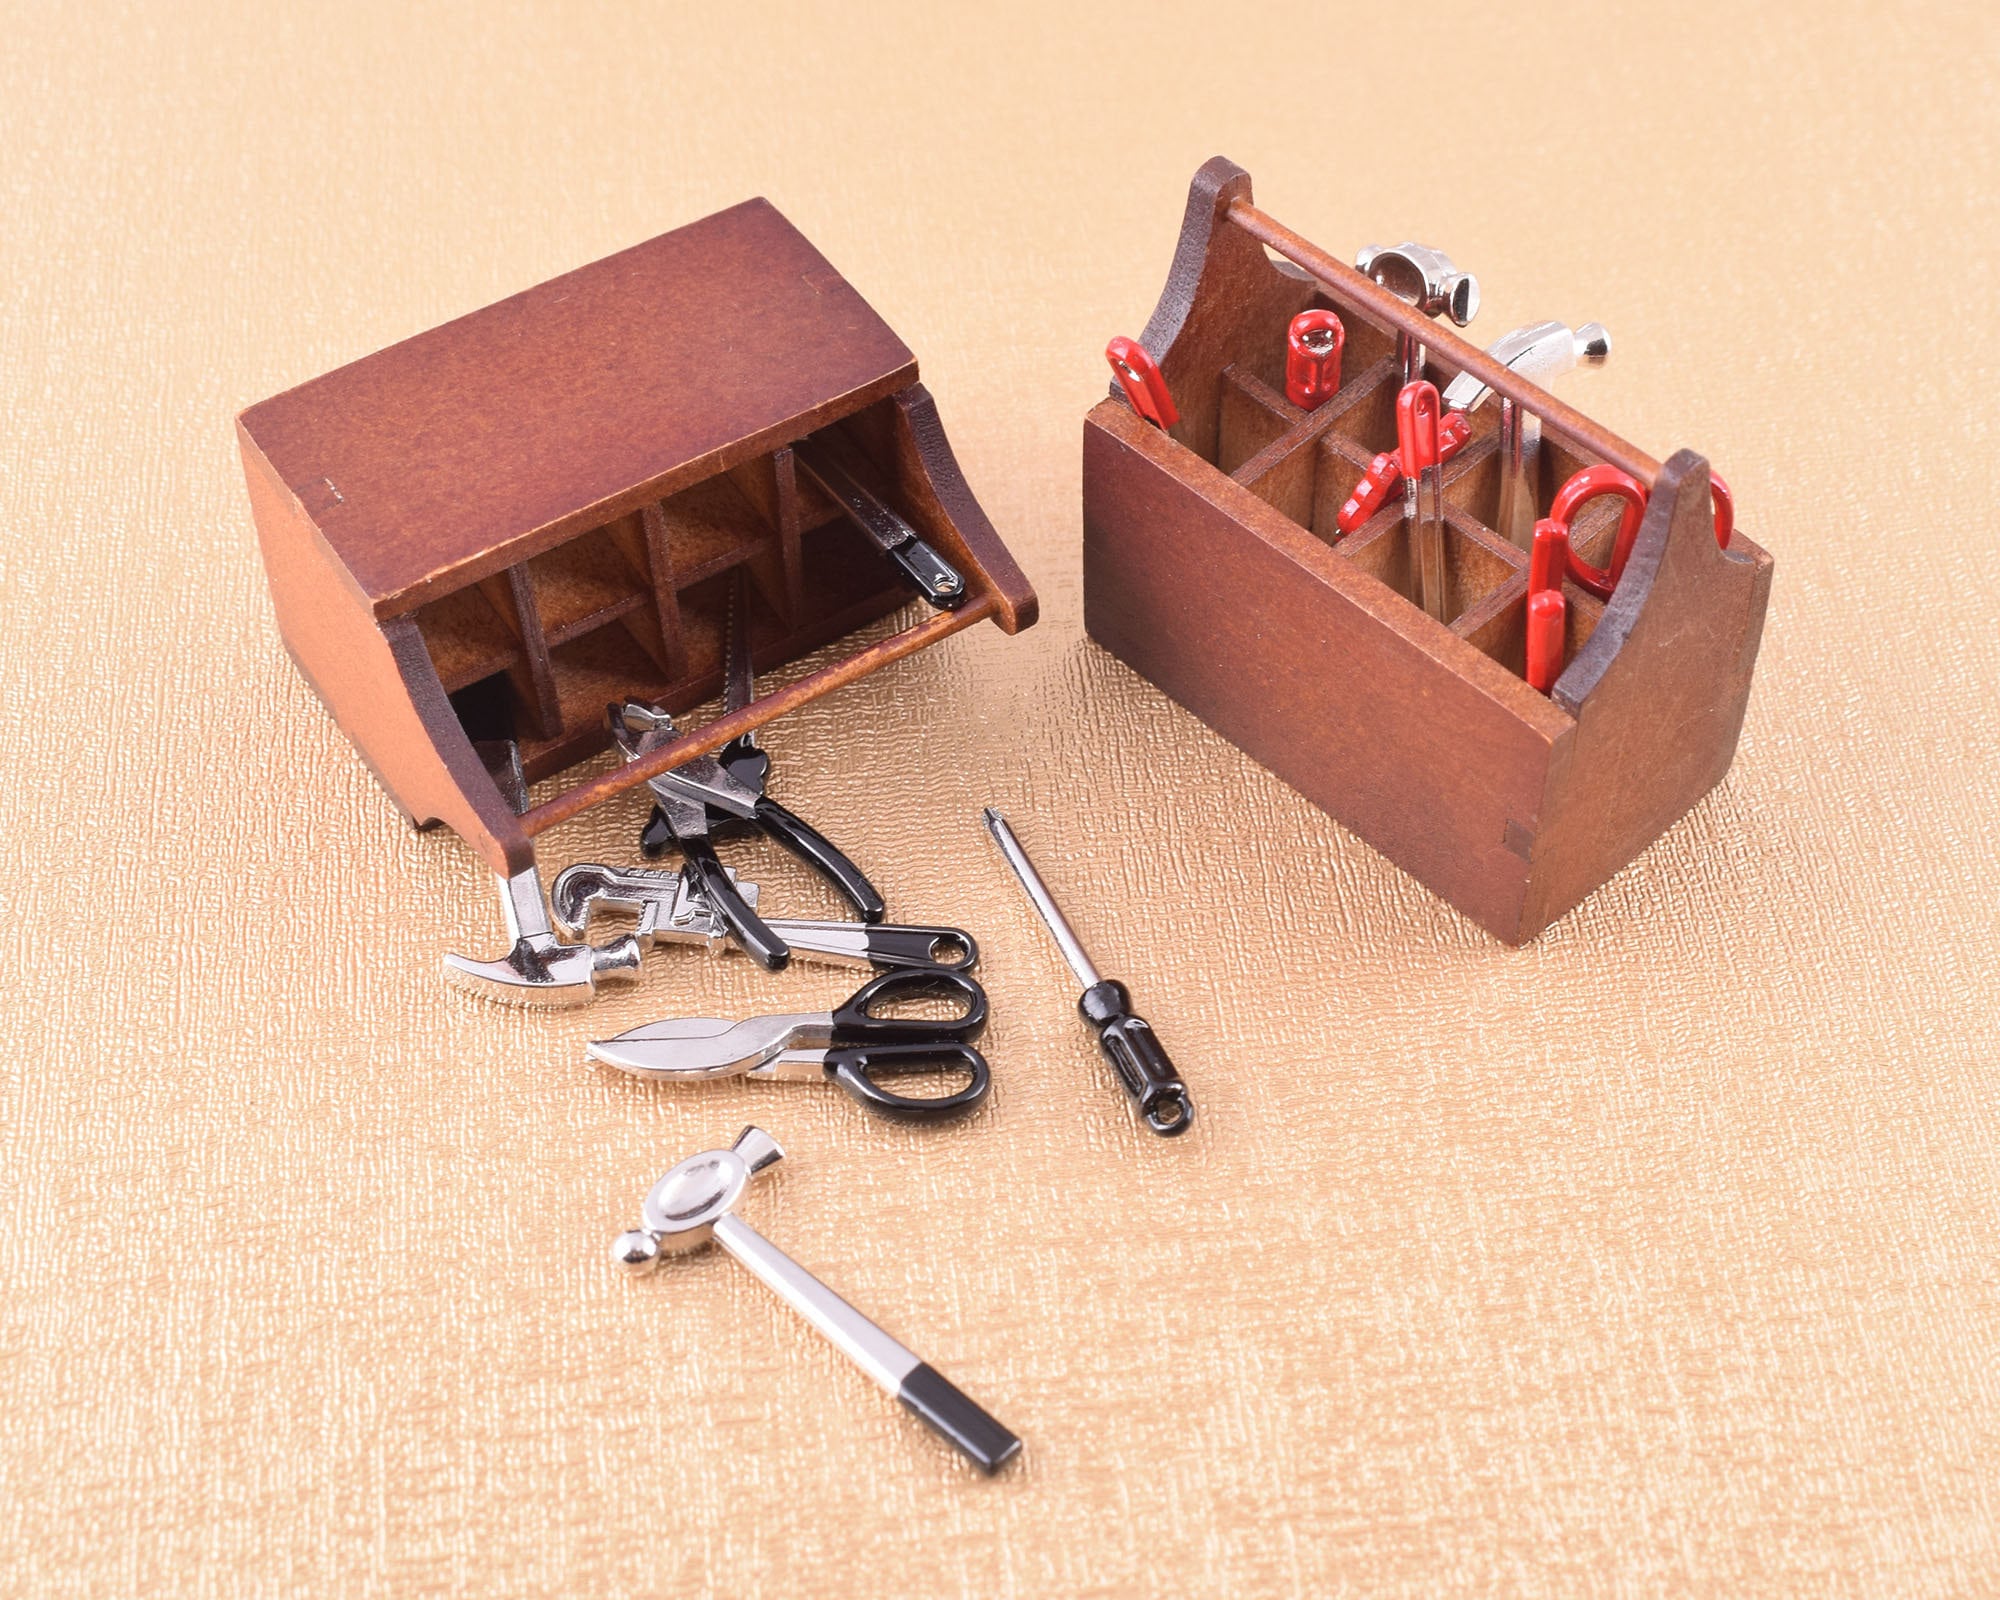 1/12 Mini Repair Tools Hammer Wrench Wooden Toolbox Doll Furniture Model  for Miniature Dollhouse Accessoreis Boy Play Tool Games - Realistic Reborn  Dolls for Sale